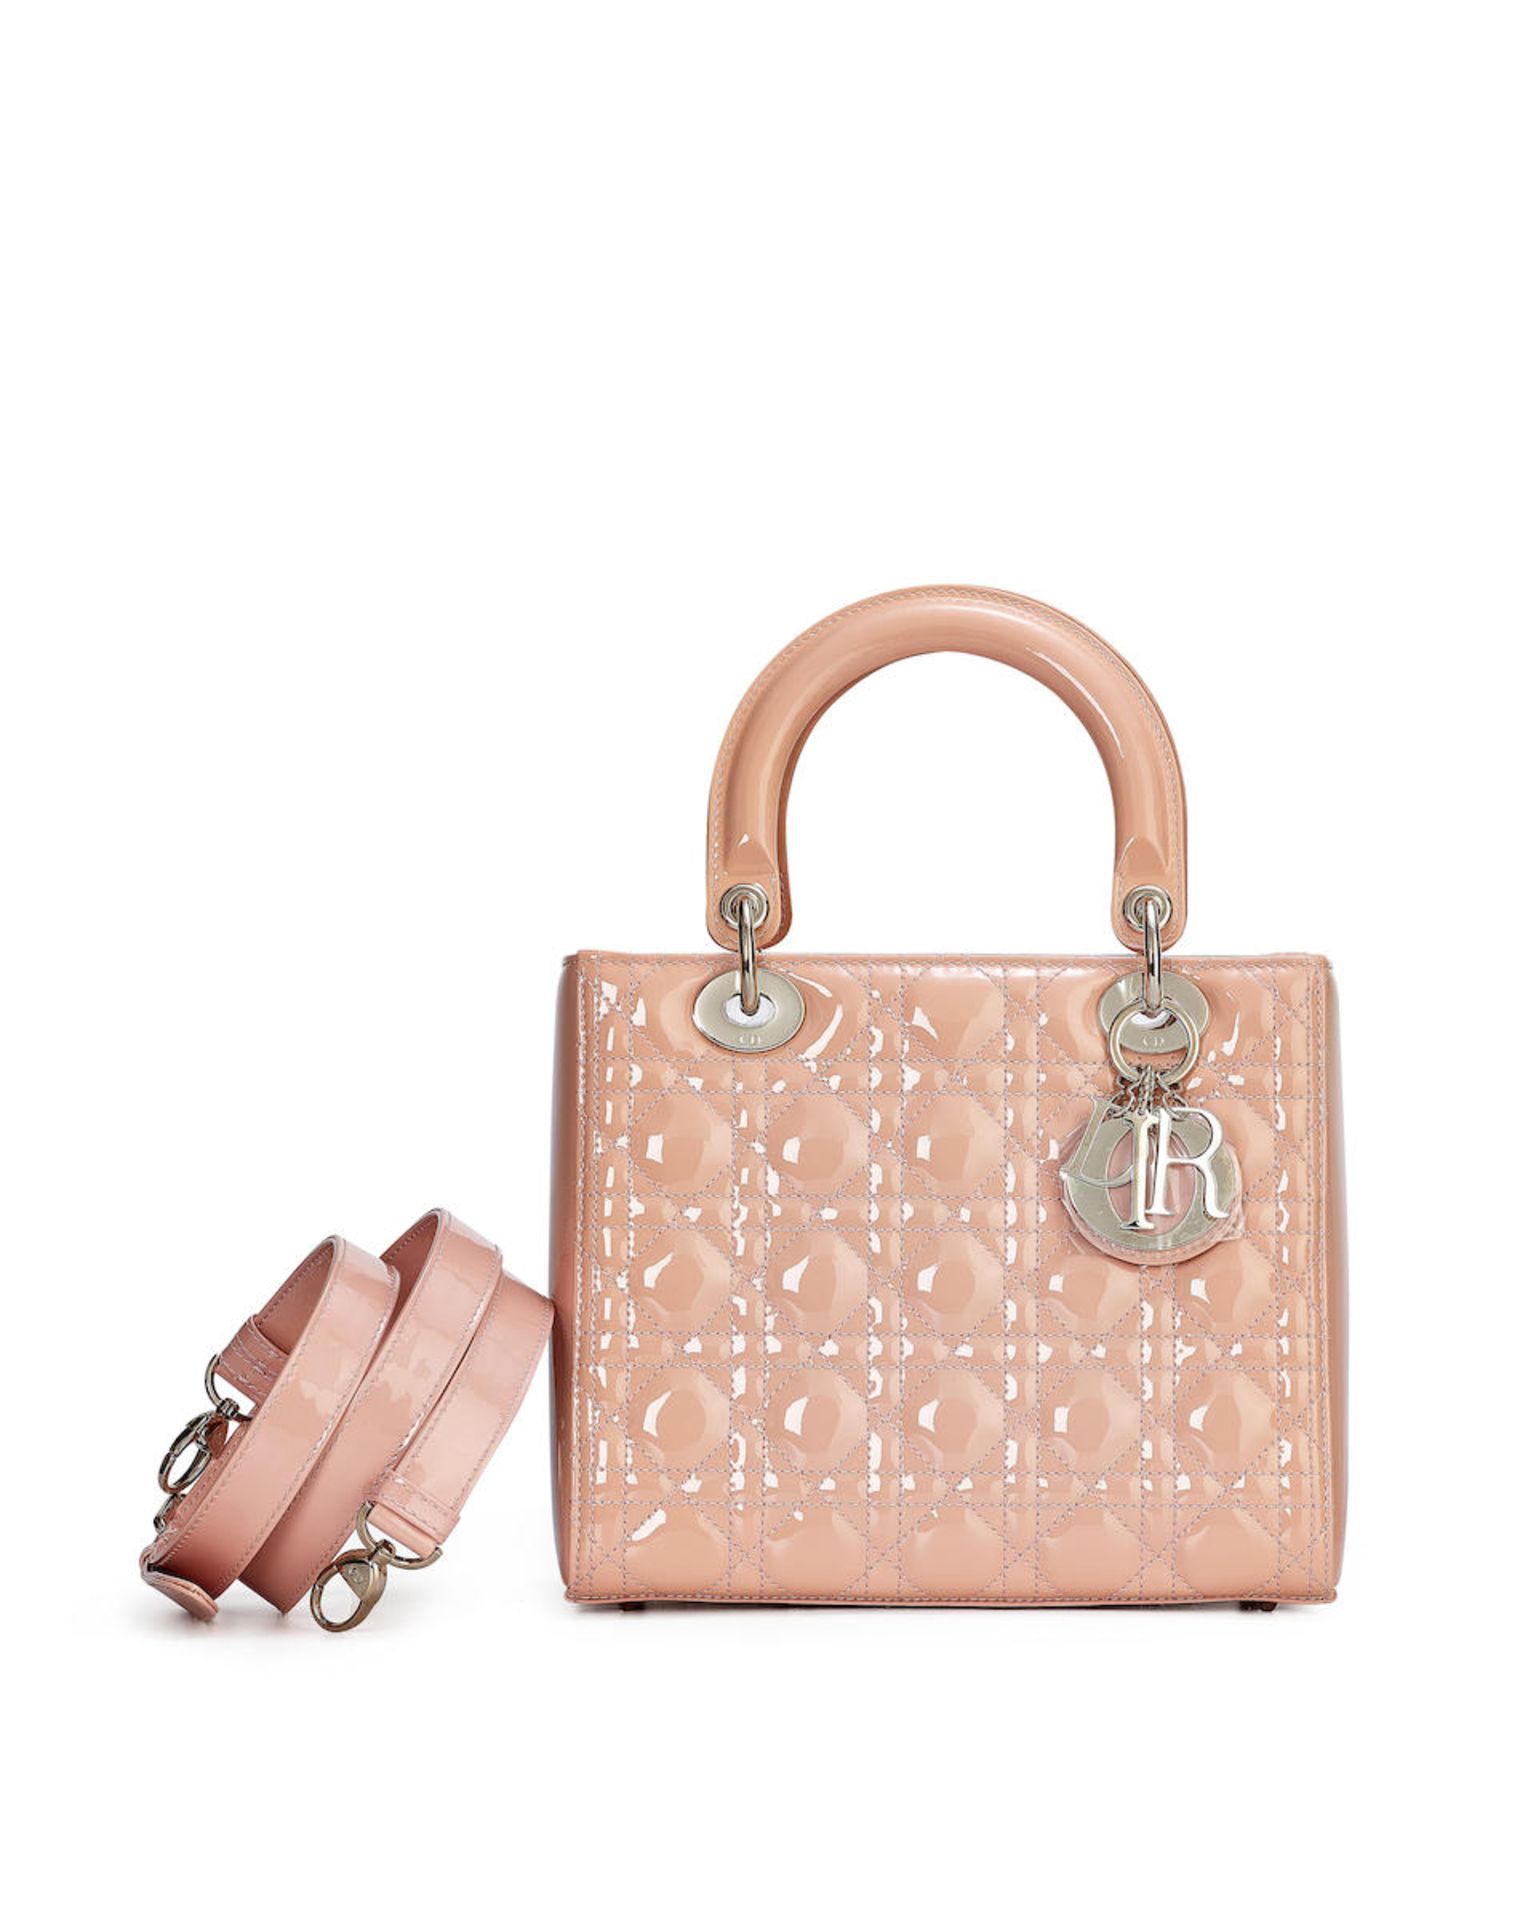 DIOR: PINK PATENT LADY DIOR BAG WITH SILVER TONED HARDWARE (Includes authentication card, should...